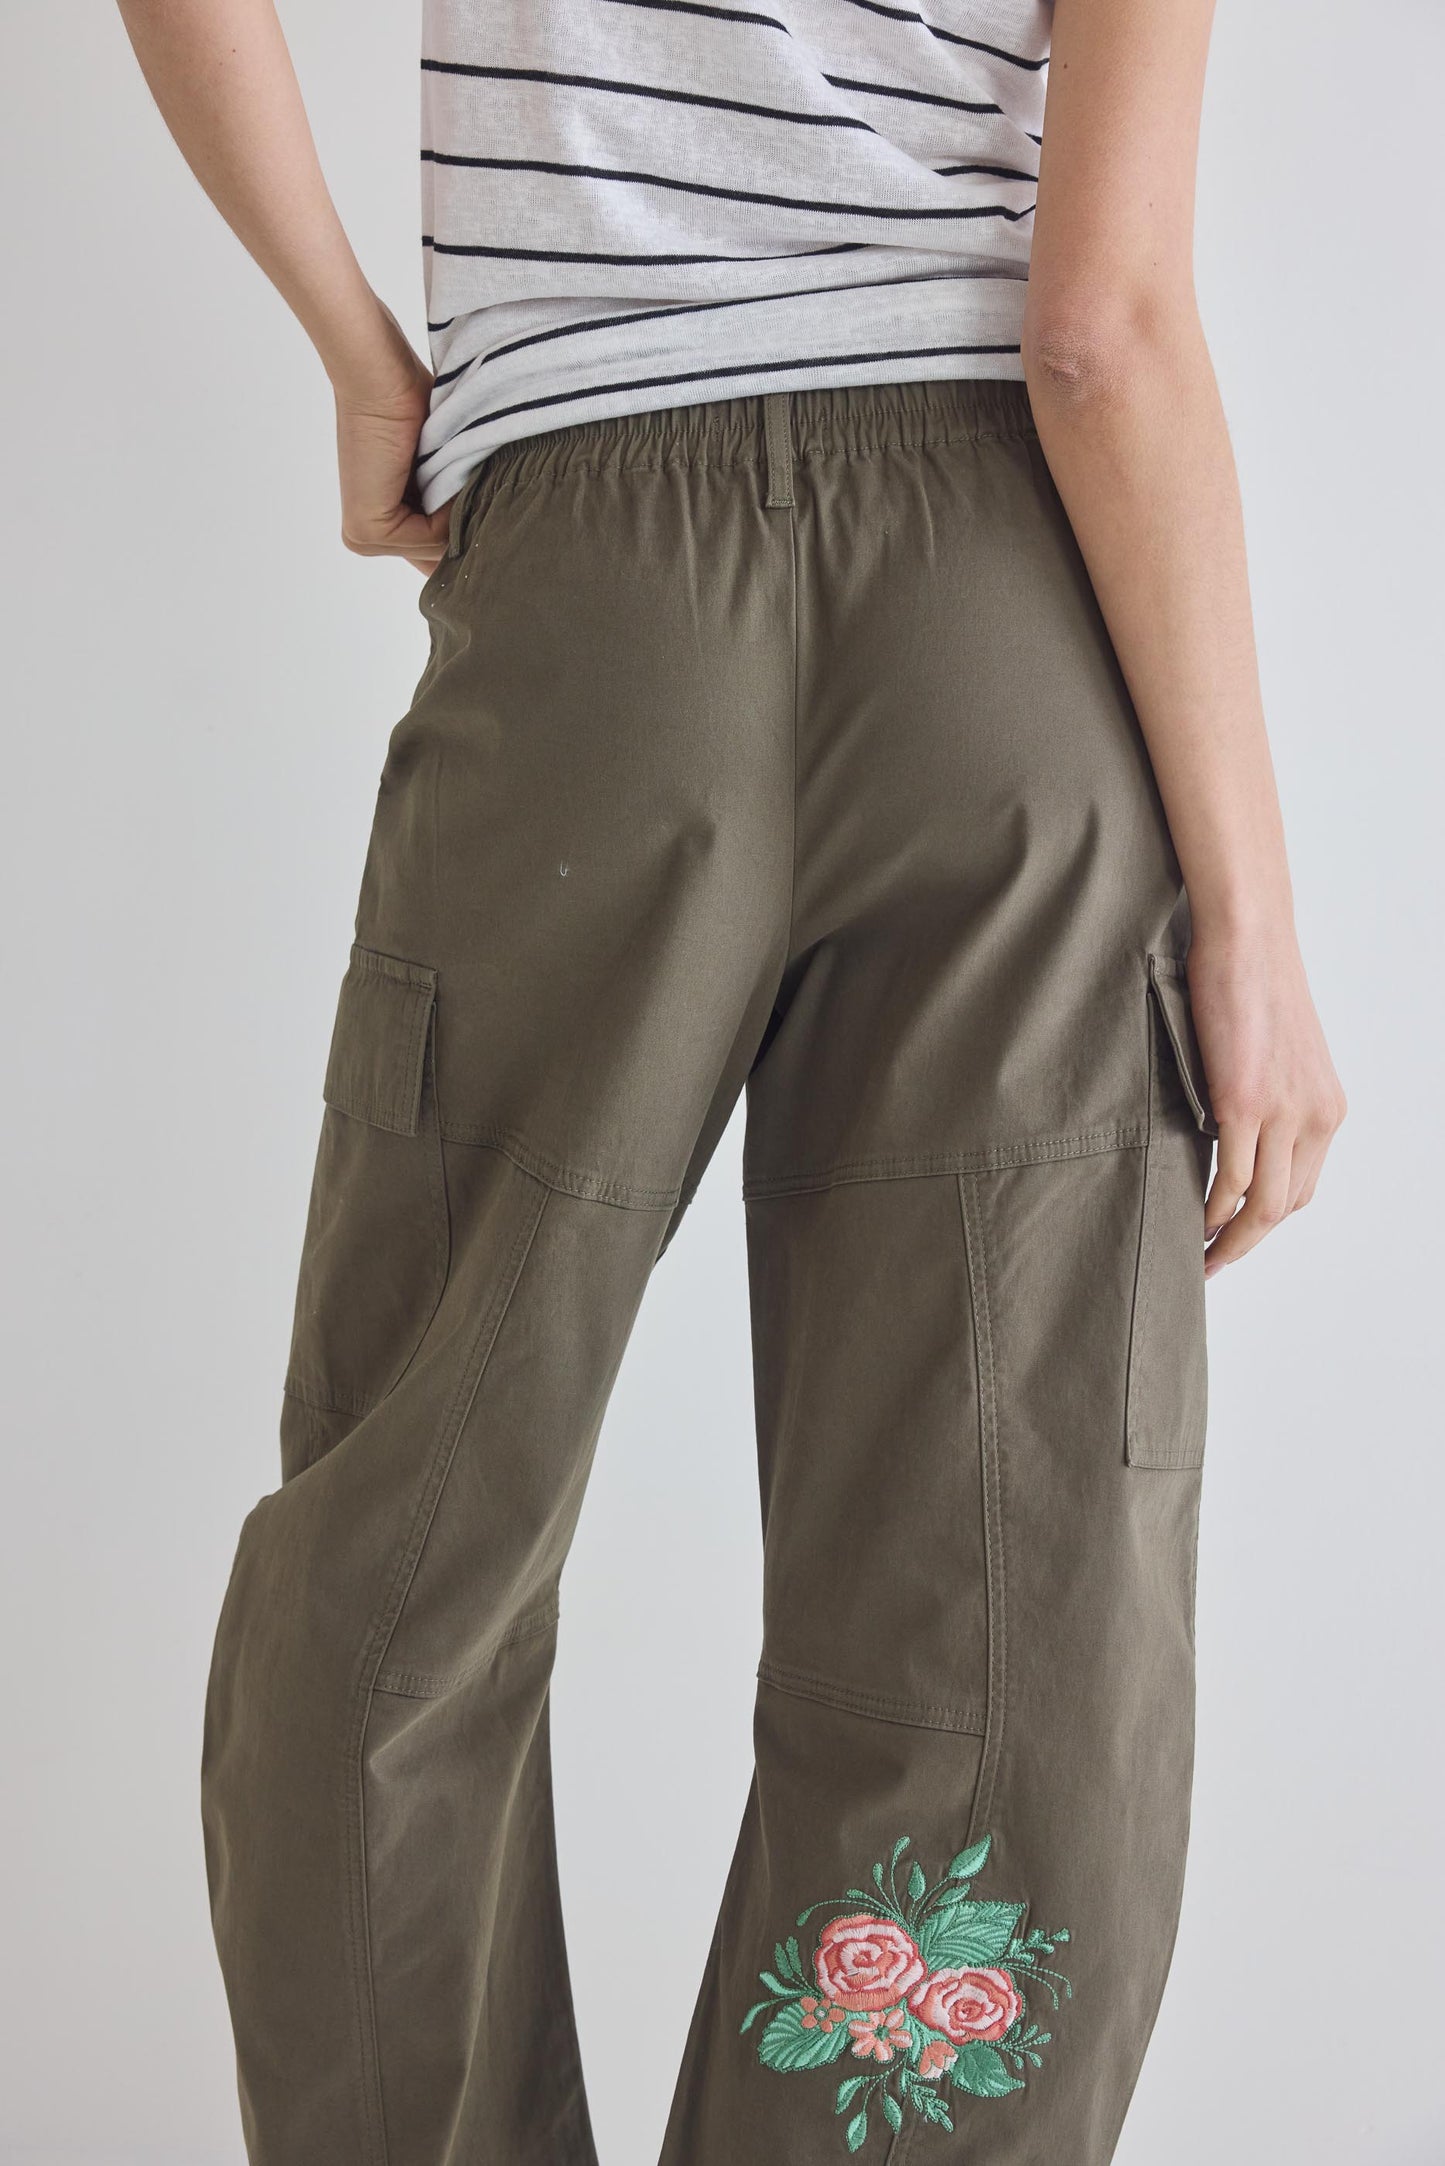 Coming Up Roses New Age Twill Utility Pants